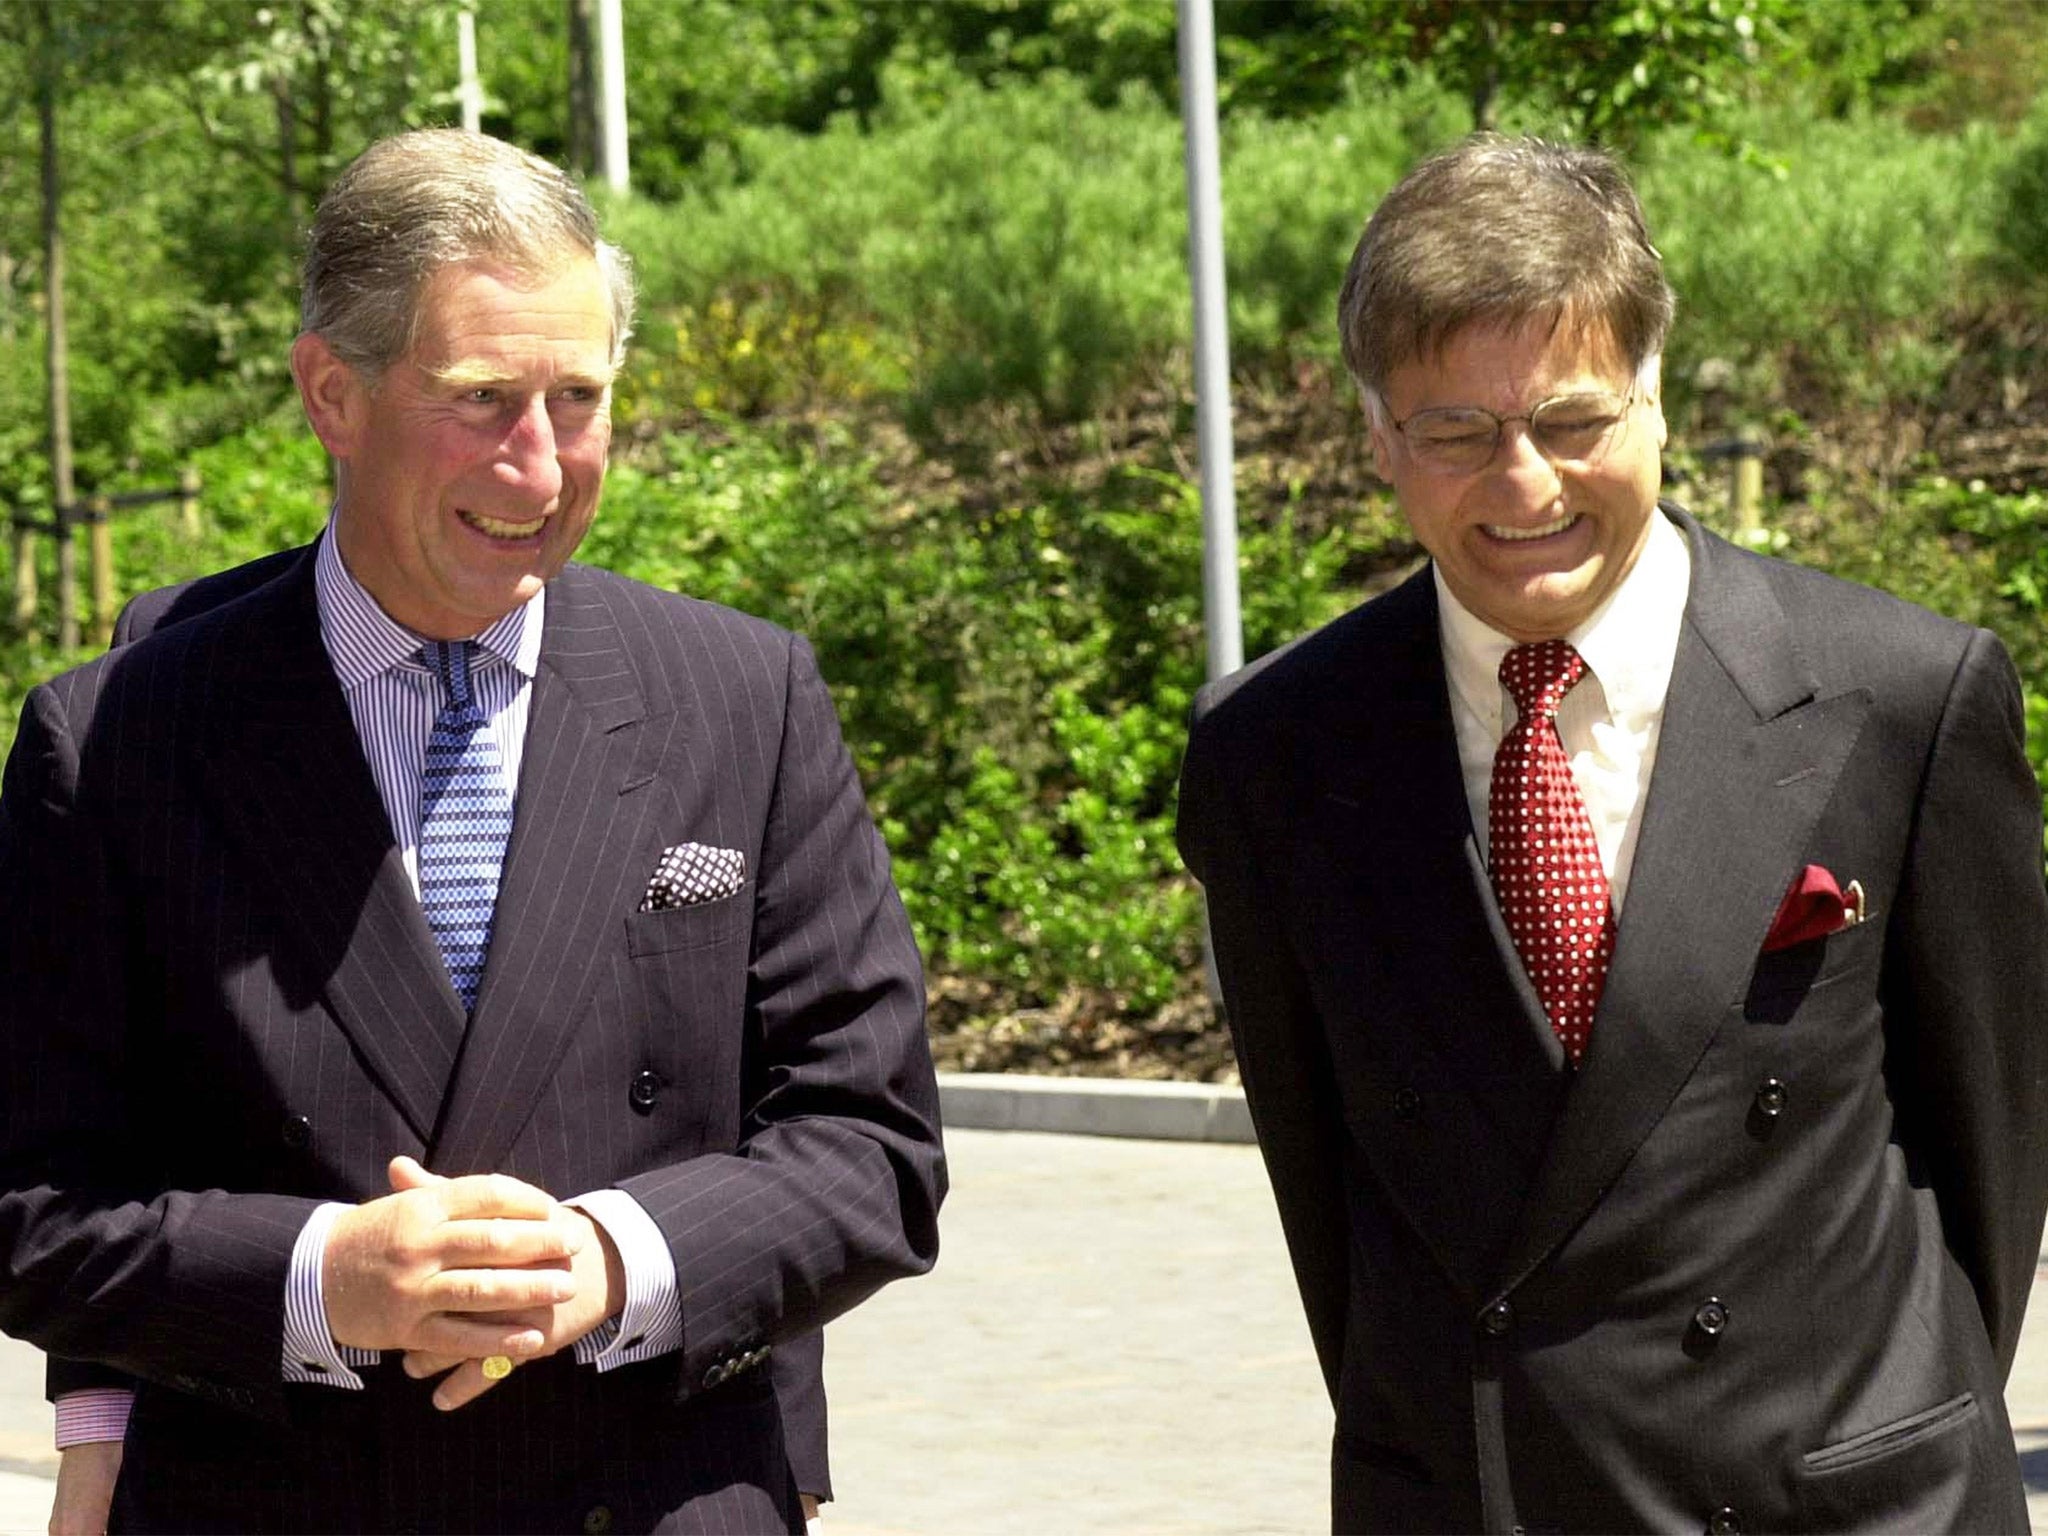 Noon, who served on the board of the Prince’s Trust, with Prince Charles in 2003